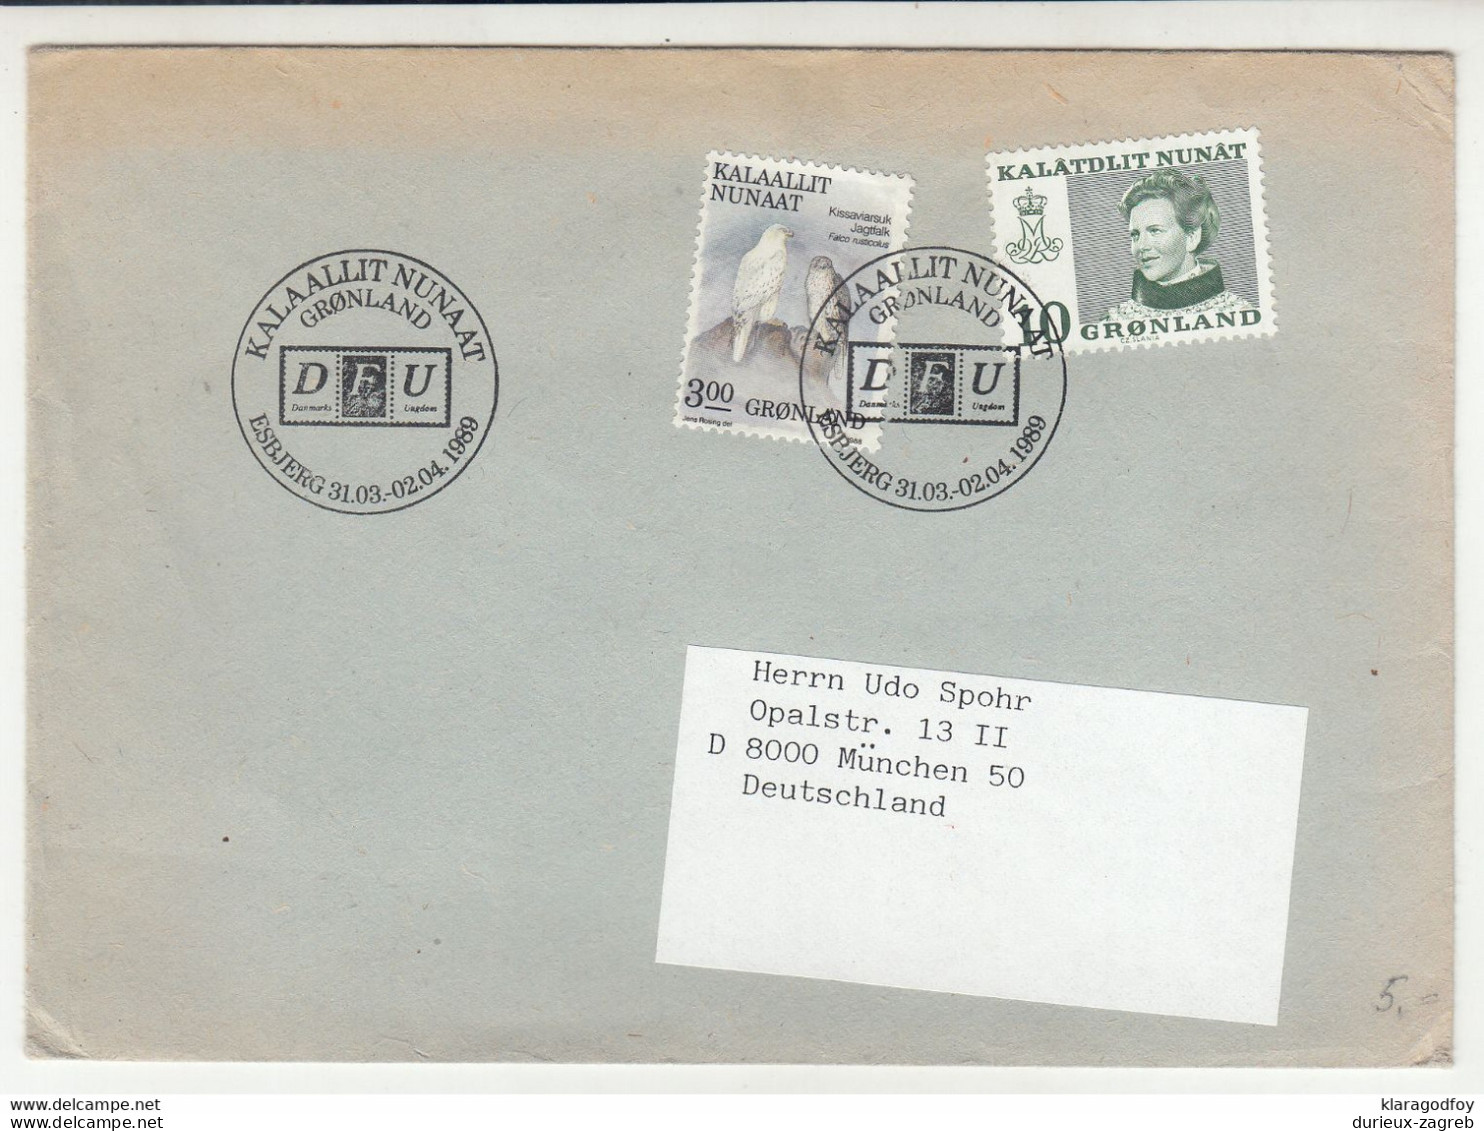 Greenland, Letter Cover Posted 1989 B210820 - Briefe U. Dokumente